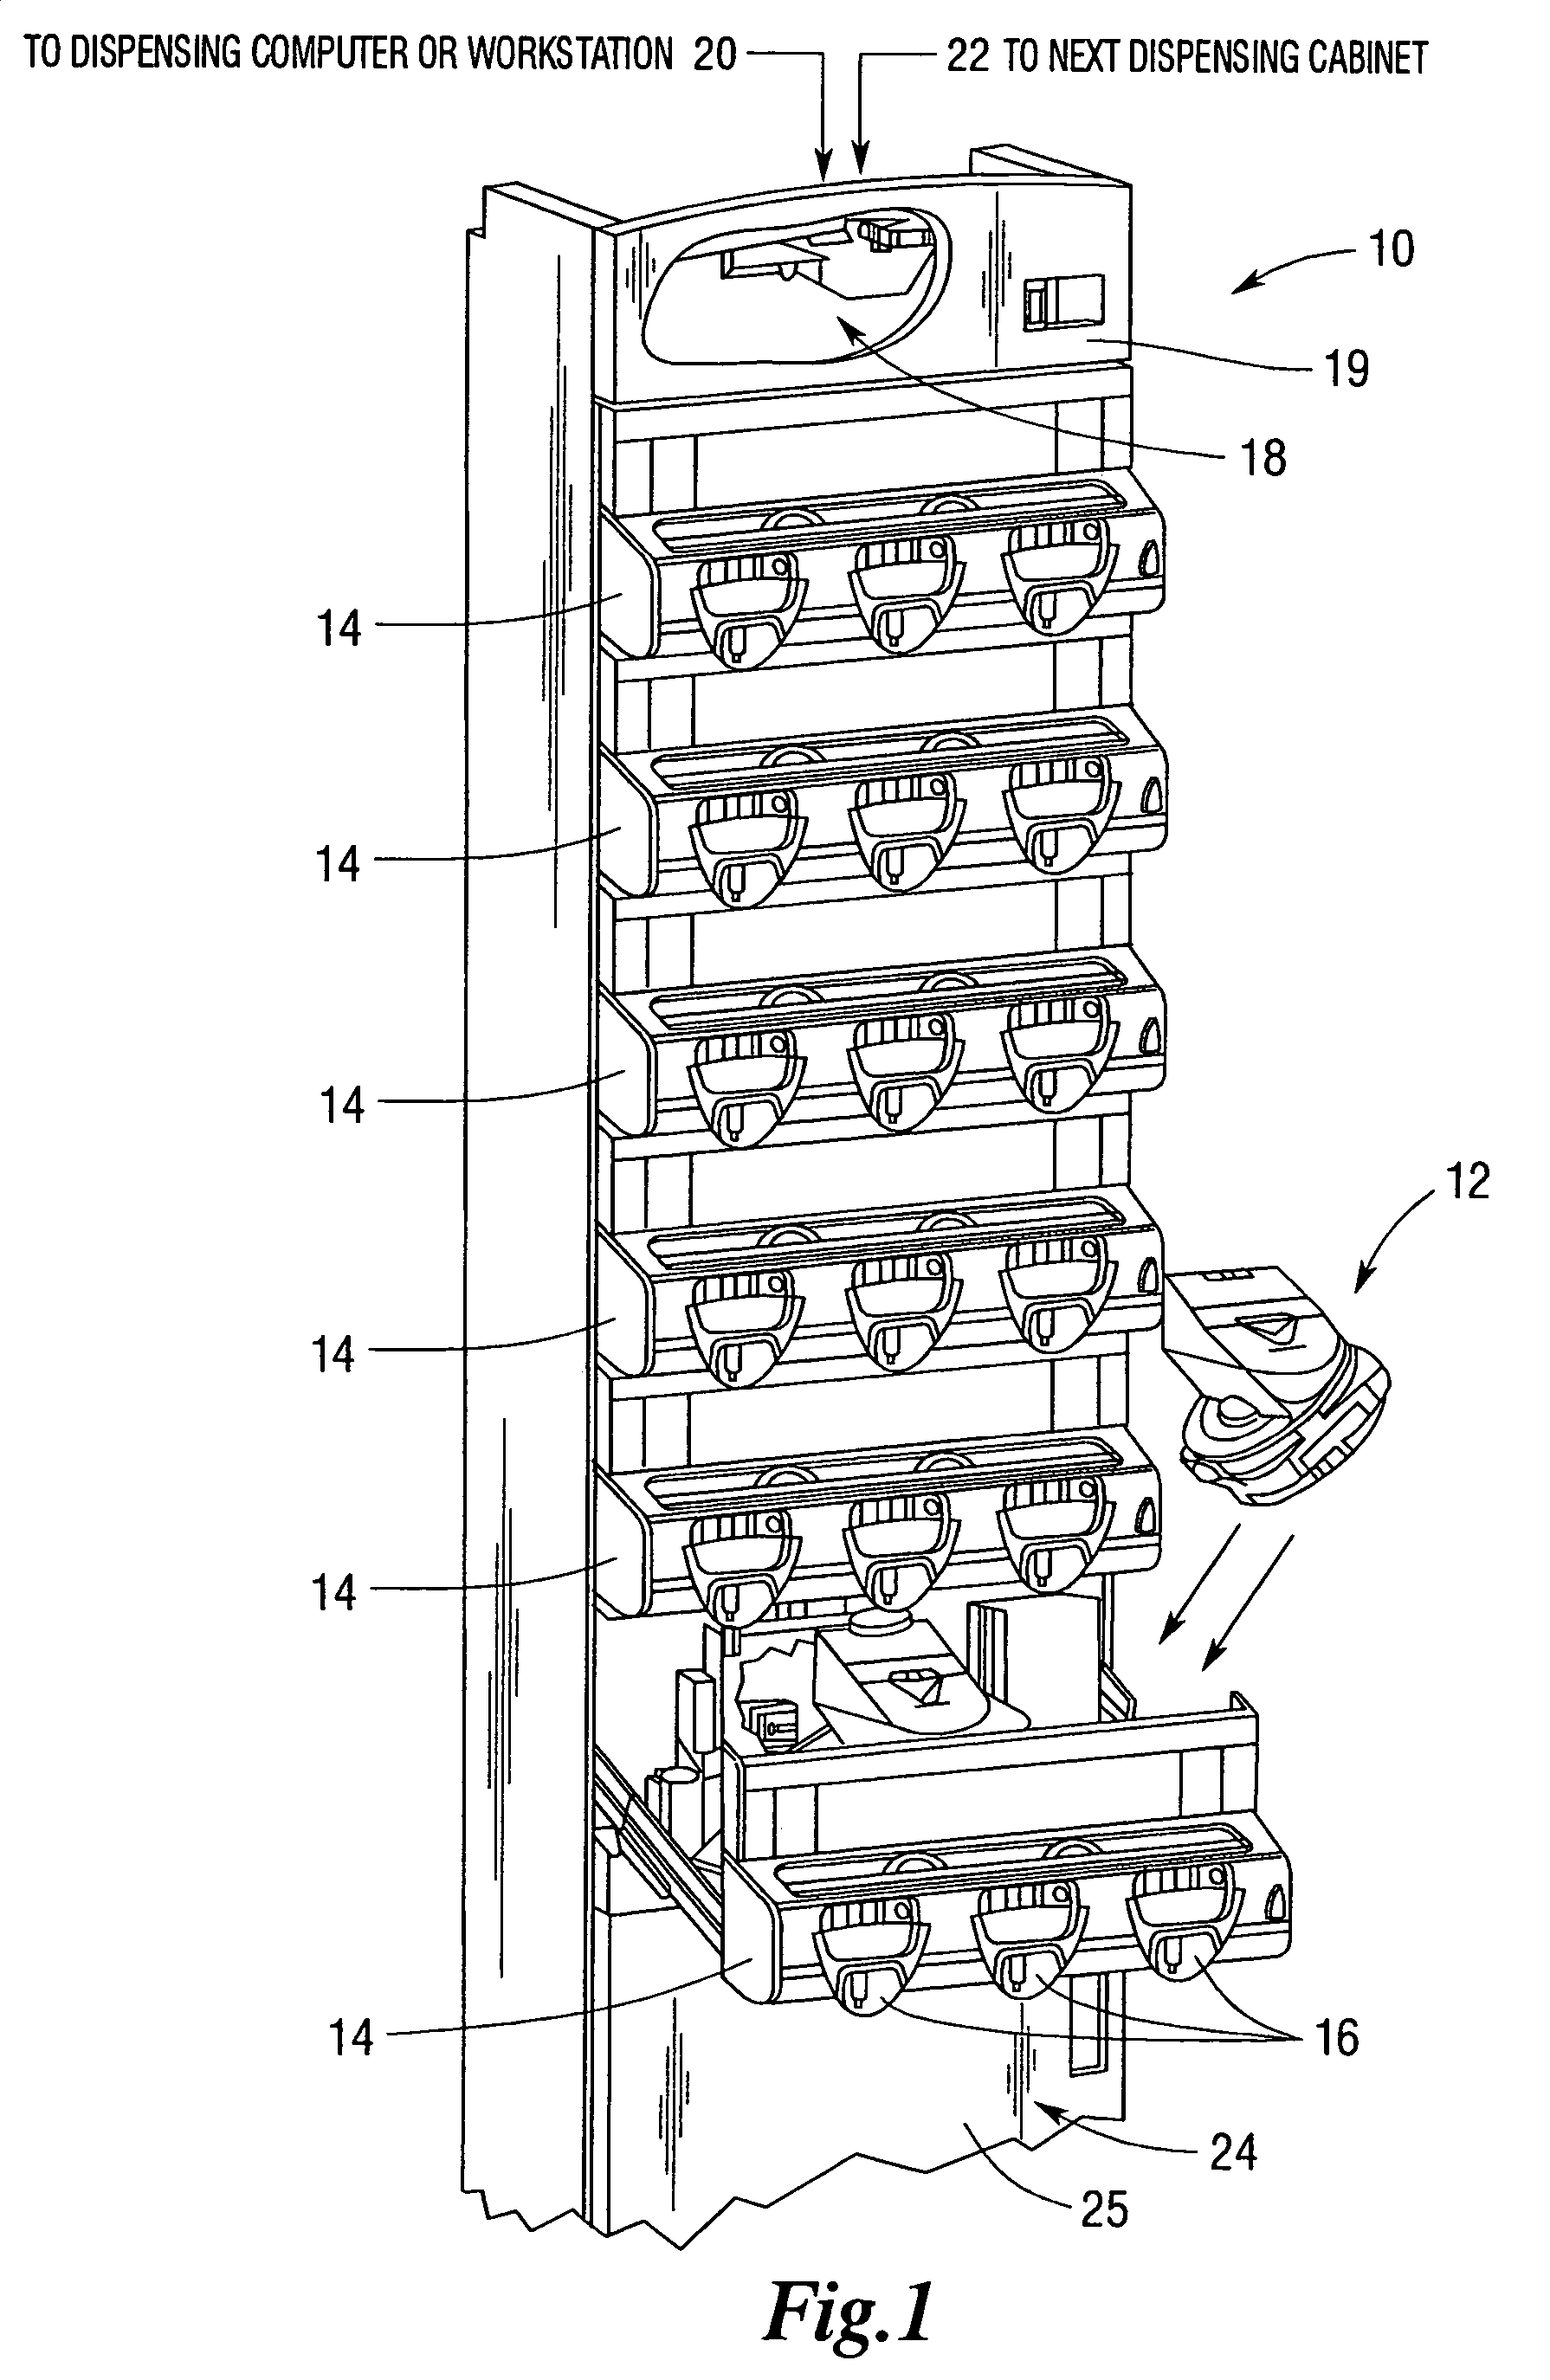 Dispensing device having a storage chamber, dispensing chamber and a feed regulator there between